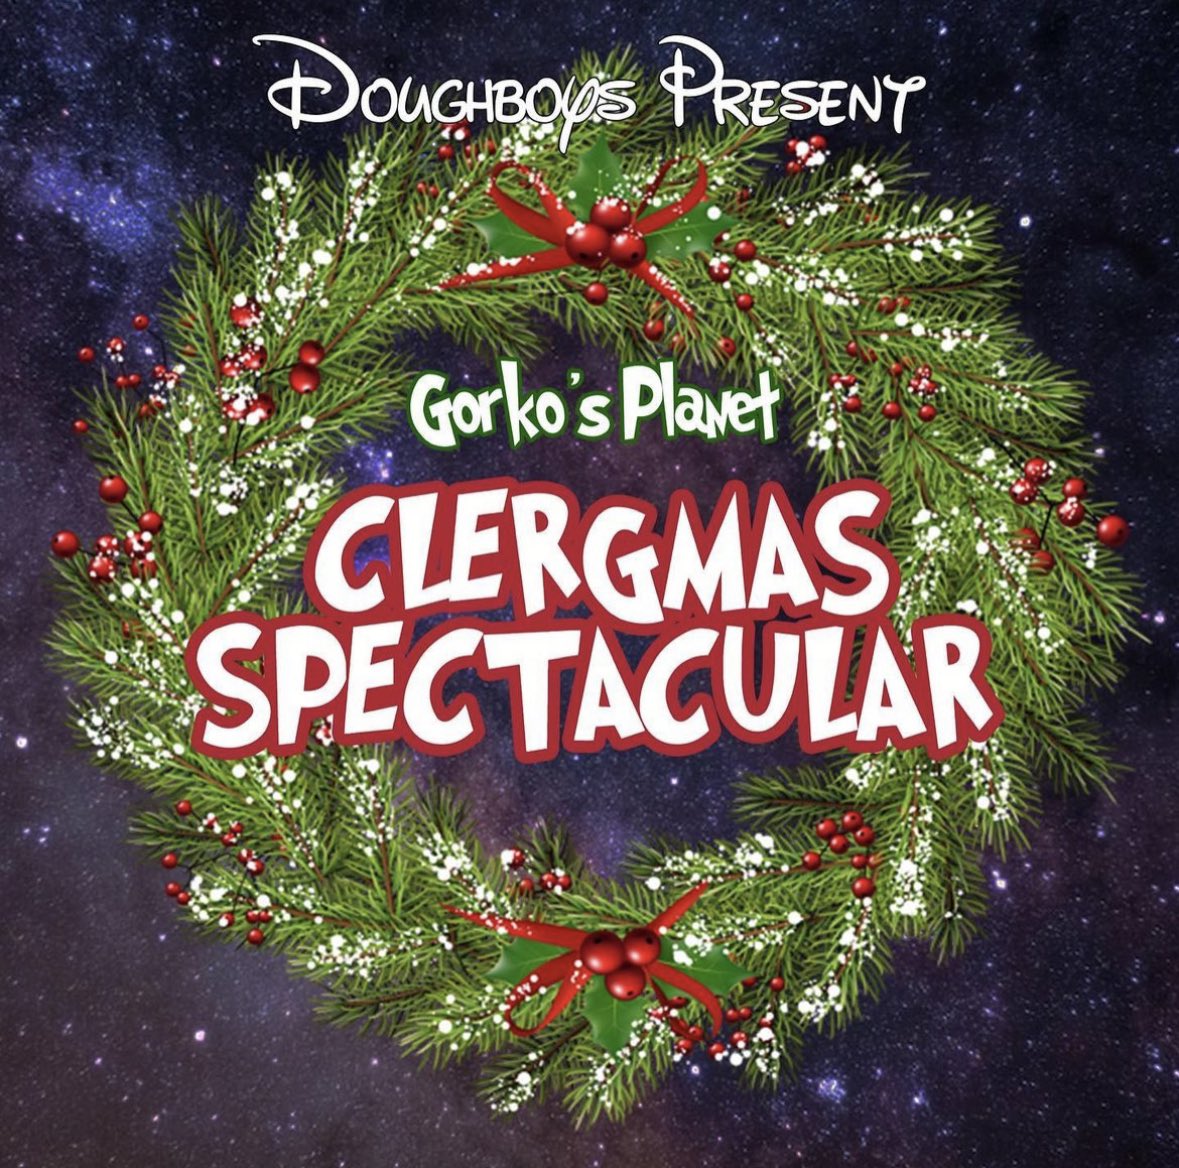 Unlocked and Free for all! It's the Doughboys 2022 Holiday Special! Gorko's Planet Clergmas Spectacular! After Mitch gifts Wiger a Gorko for Christmas, they learn that Gorko is in danger and must return to his home planet before Clergmas. headgum.com/doughboys